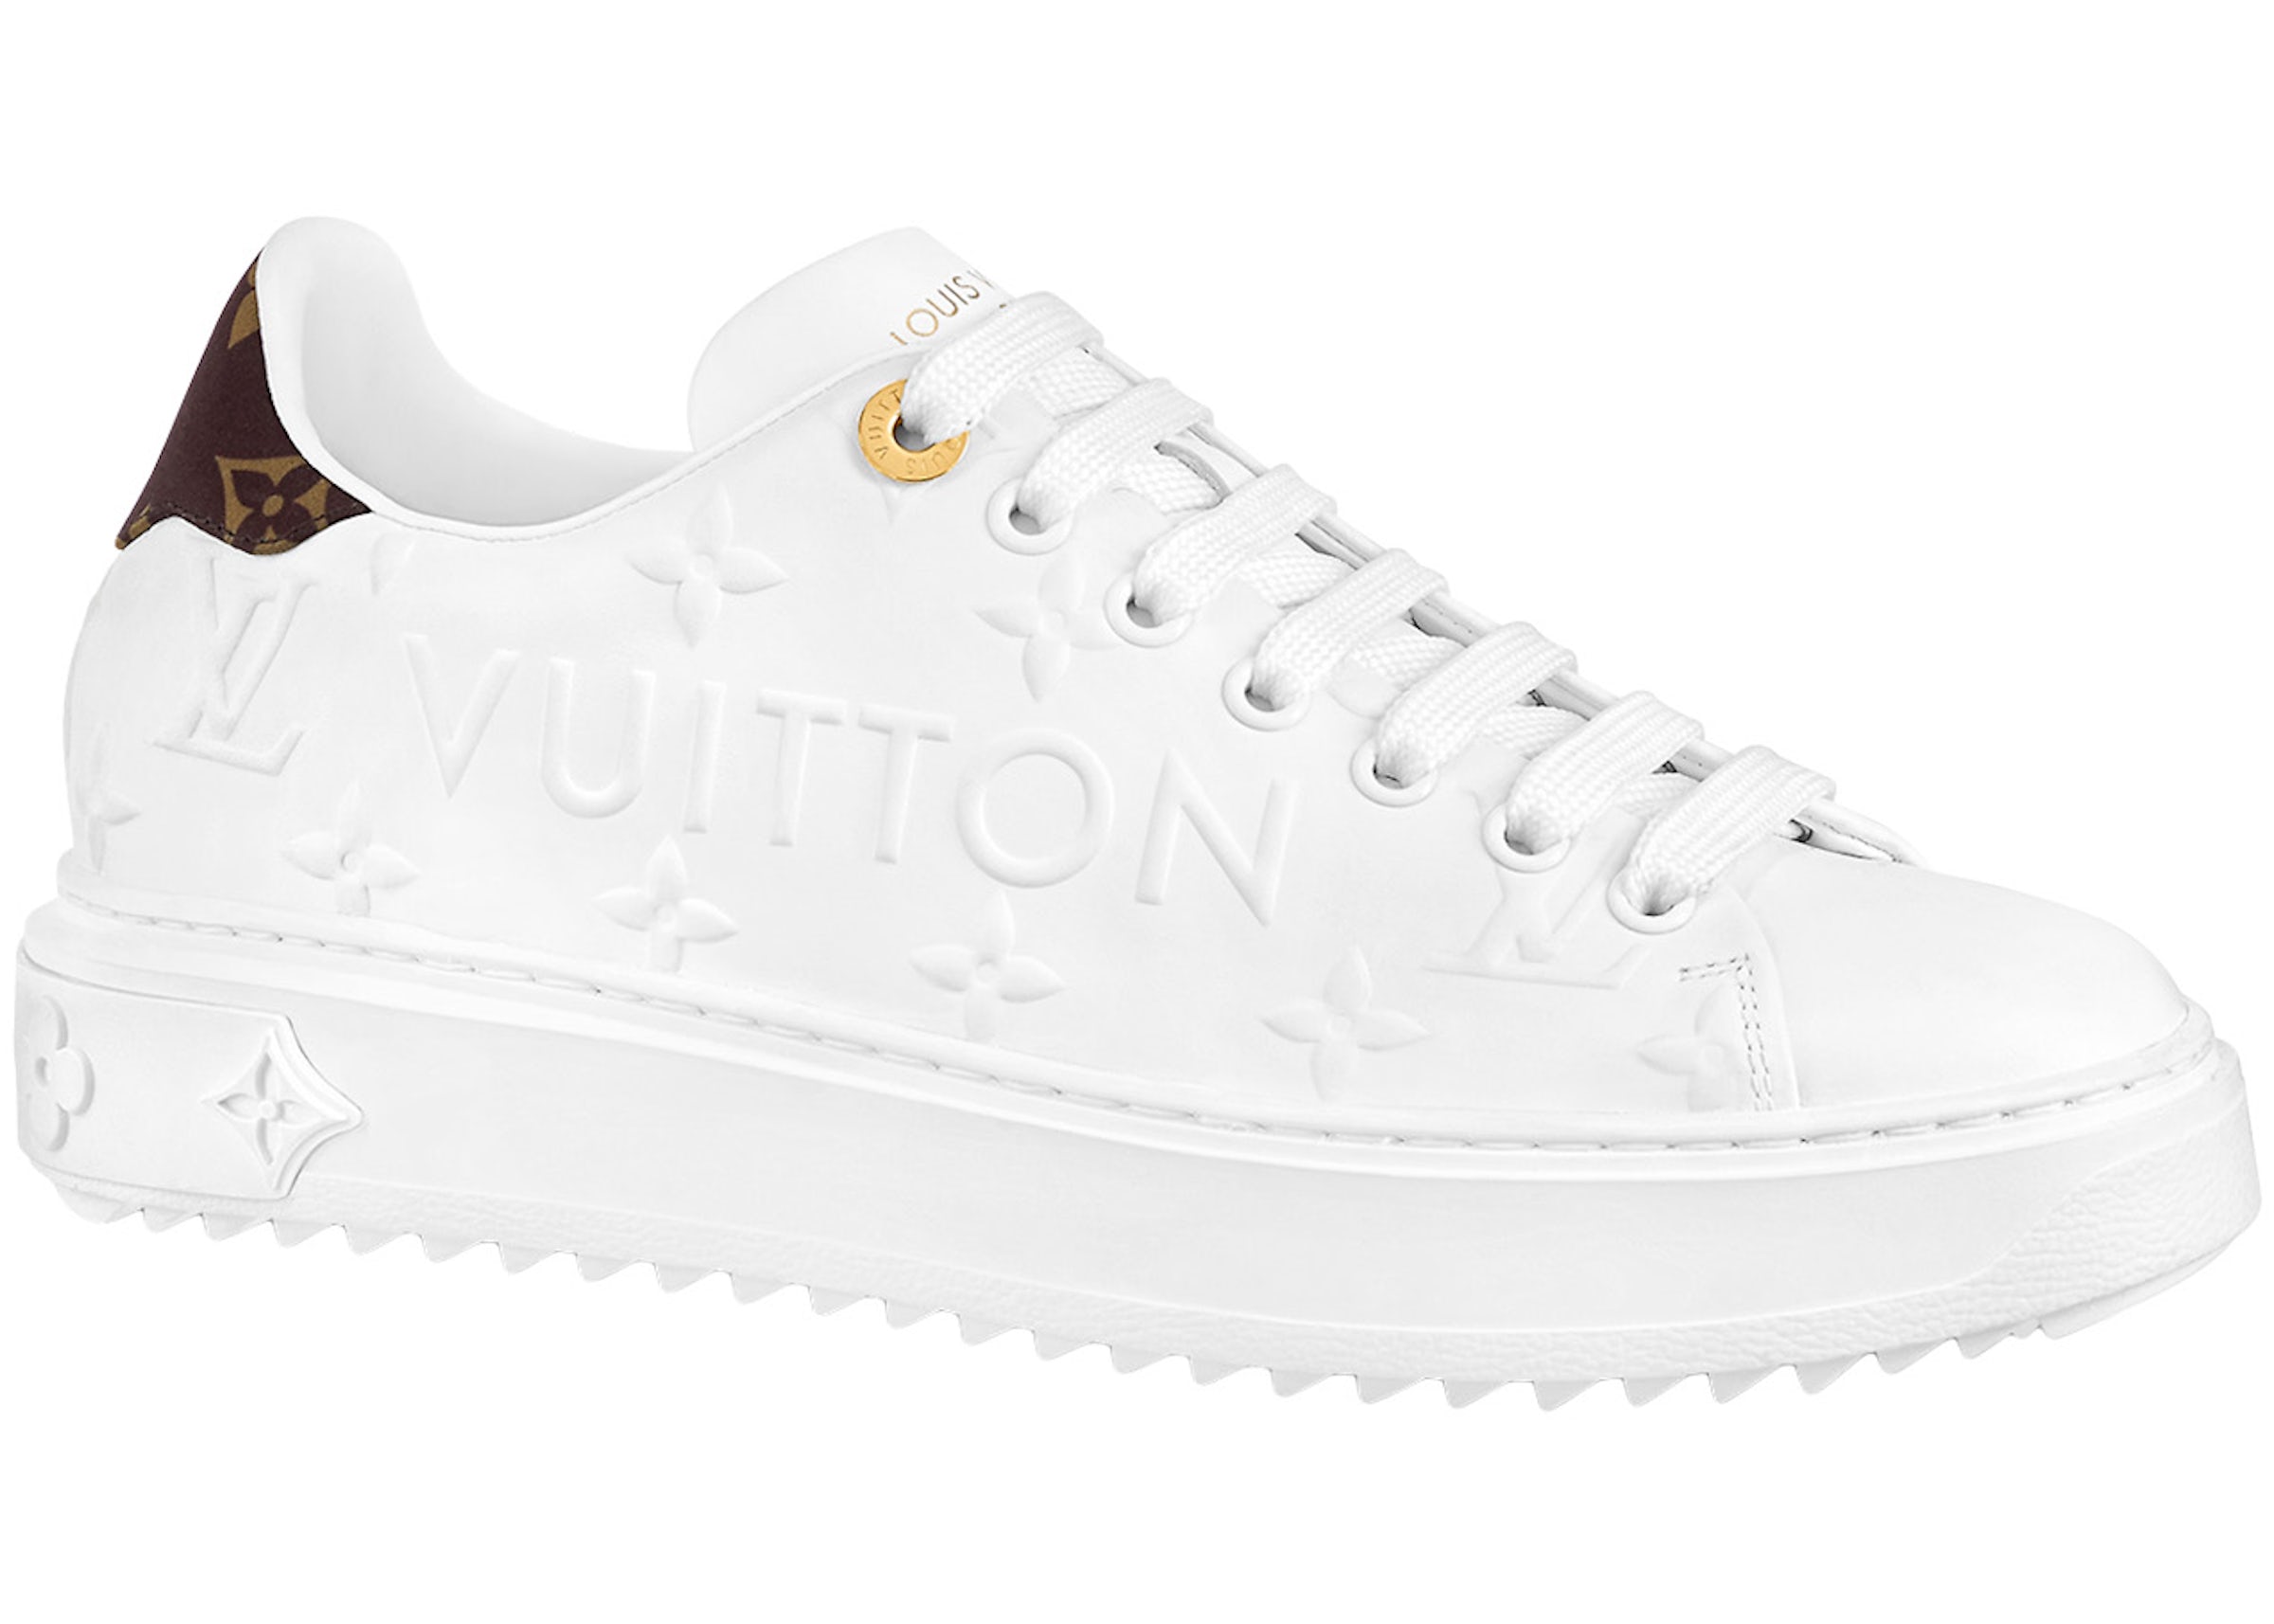 Check Out Louis Vuitton's New LVSK8 and High 8 Sneakers in 2023